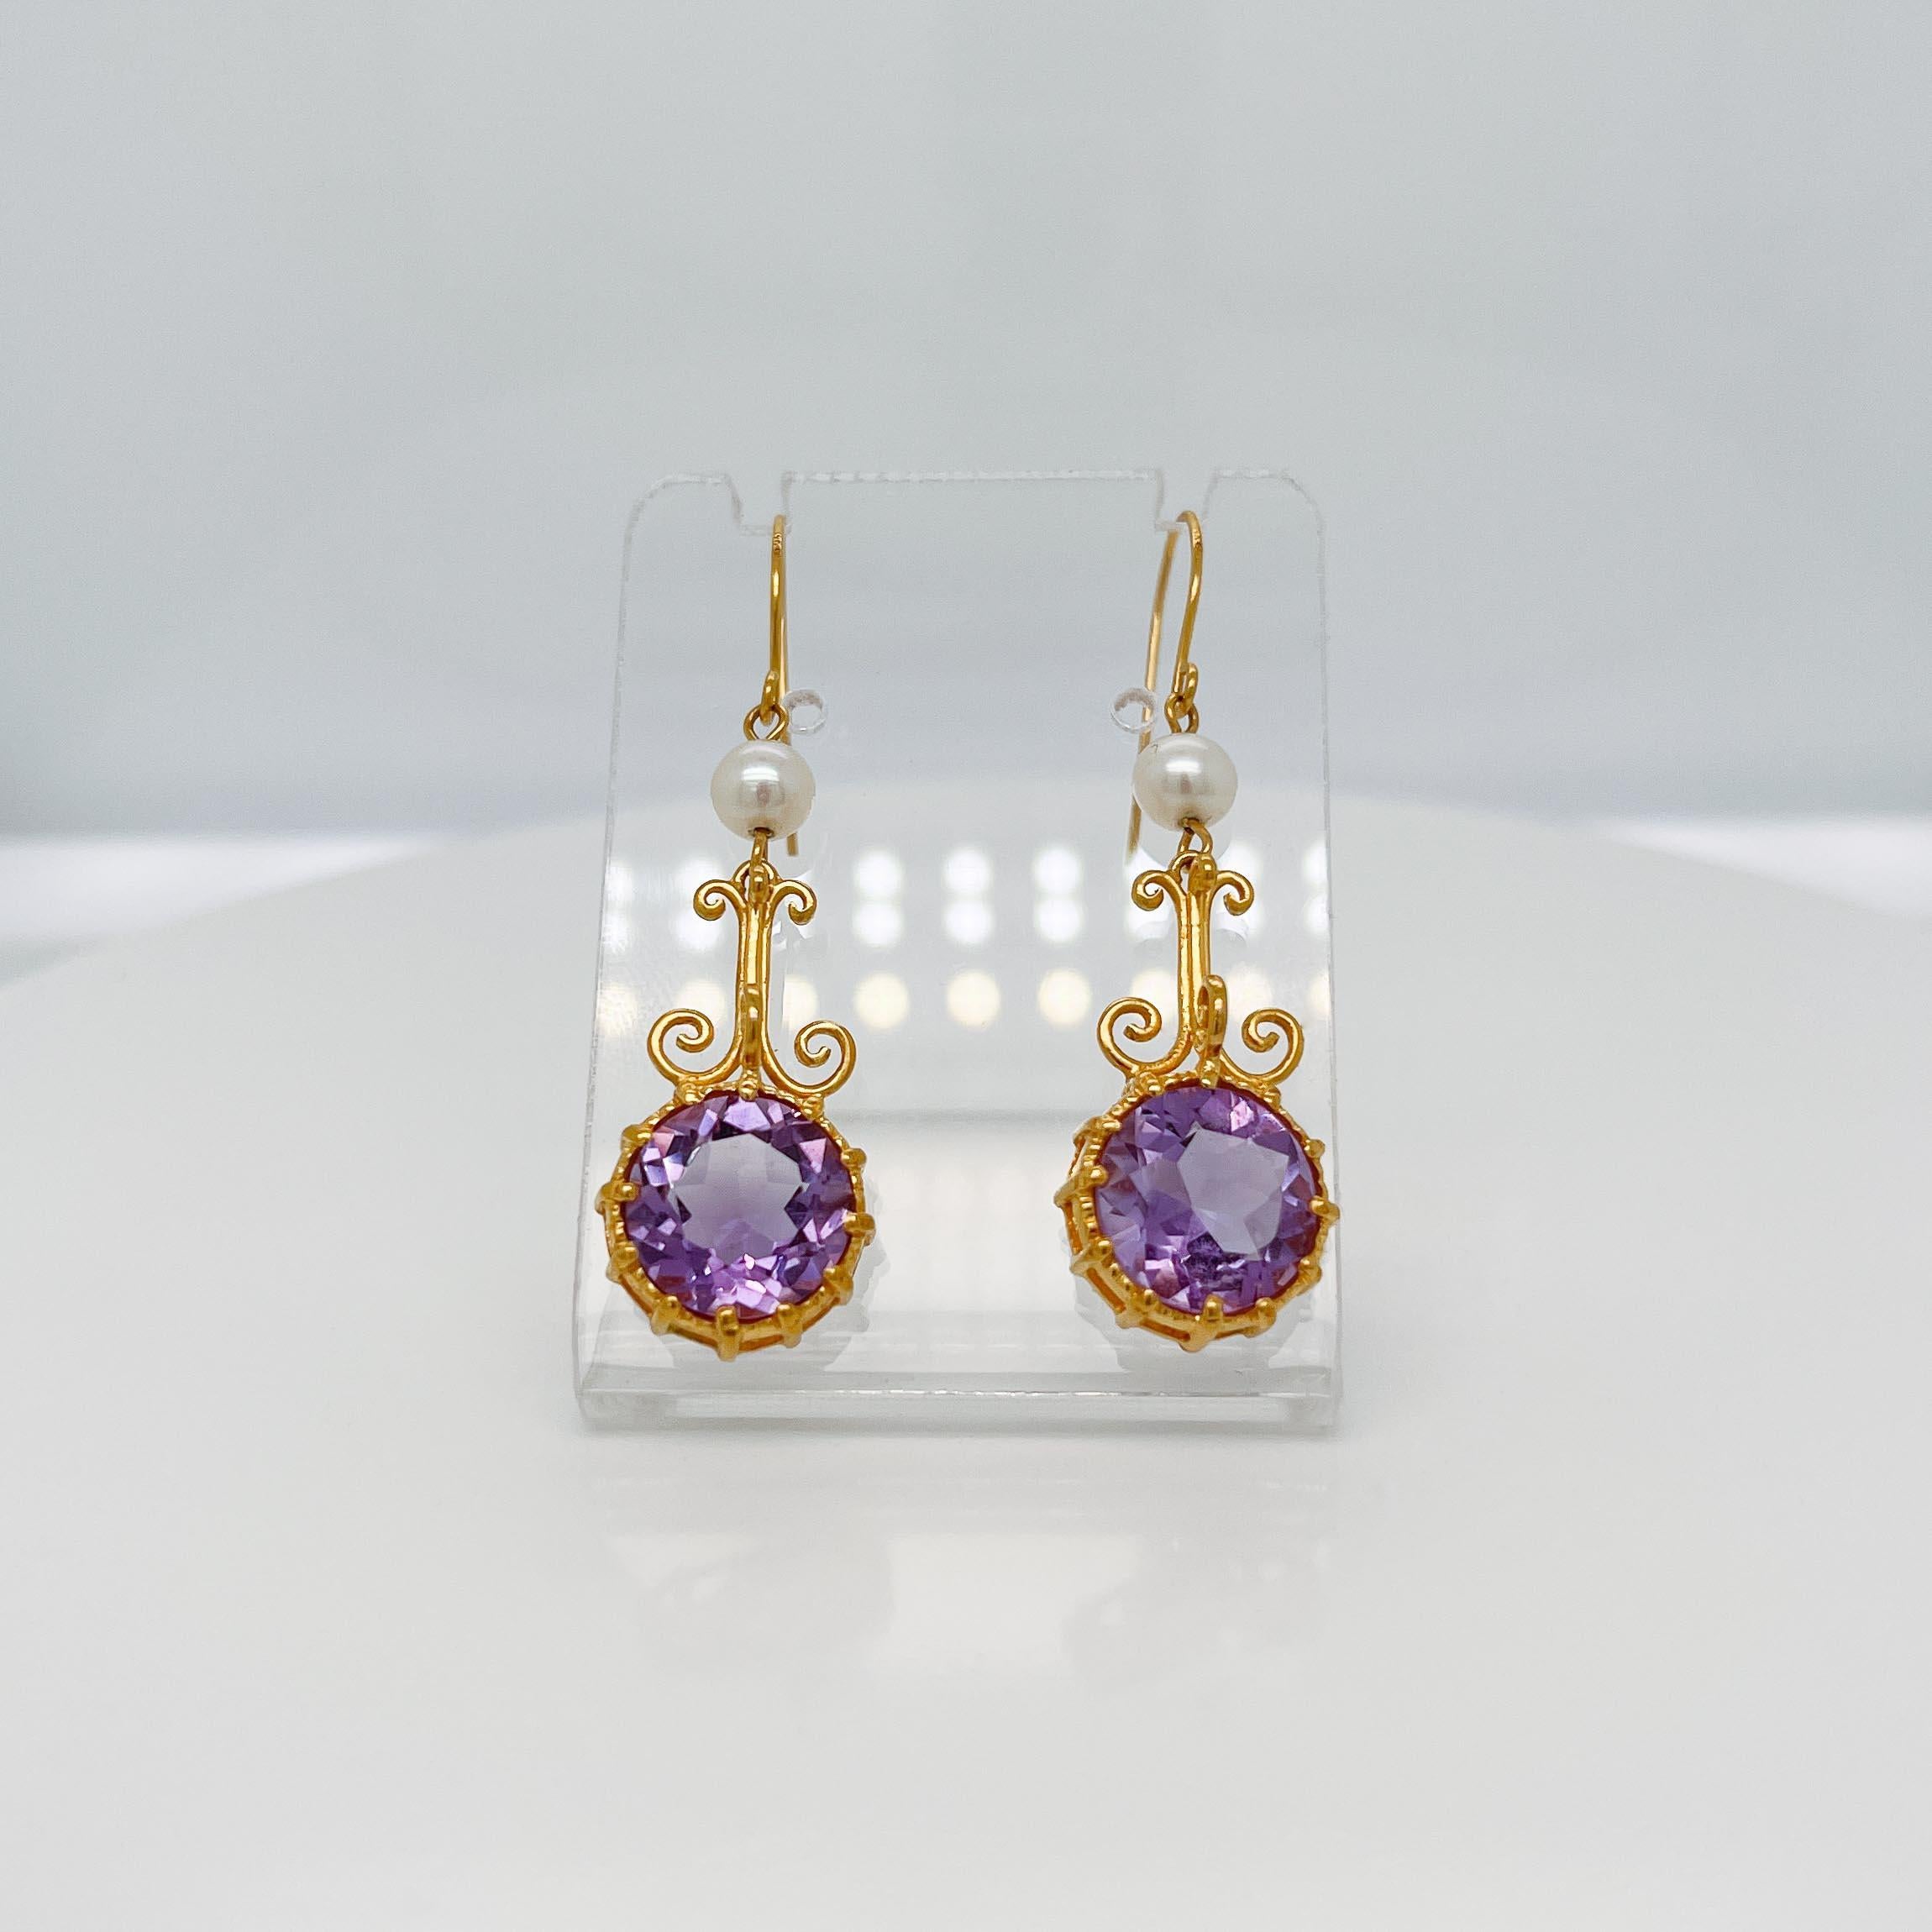 A very fine pair of earrings from the Metropolitan Museum of Art.

In satin finished 14k yellow gold . 

Each earring prong set with a round faceted amethyst gemstone suspened below around white pearl and ear hook.

The gold has a satin finish